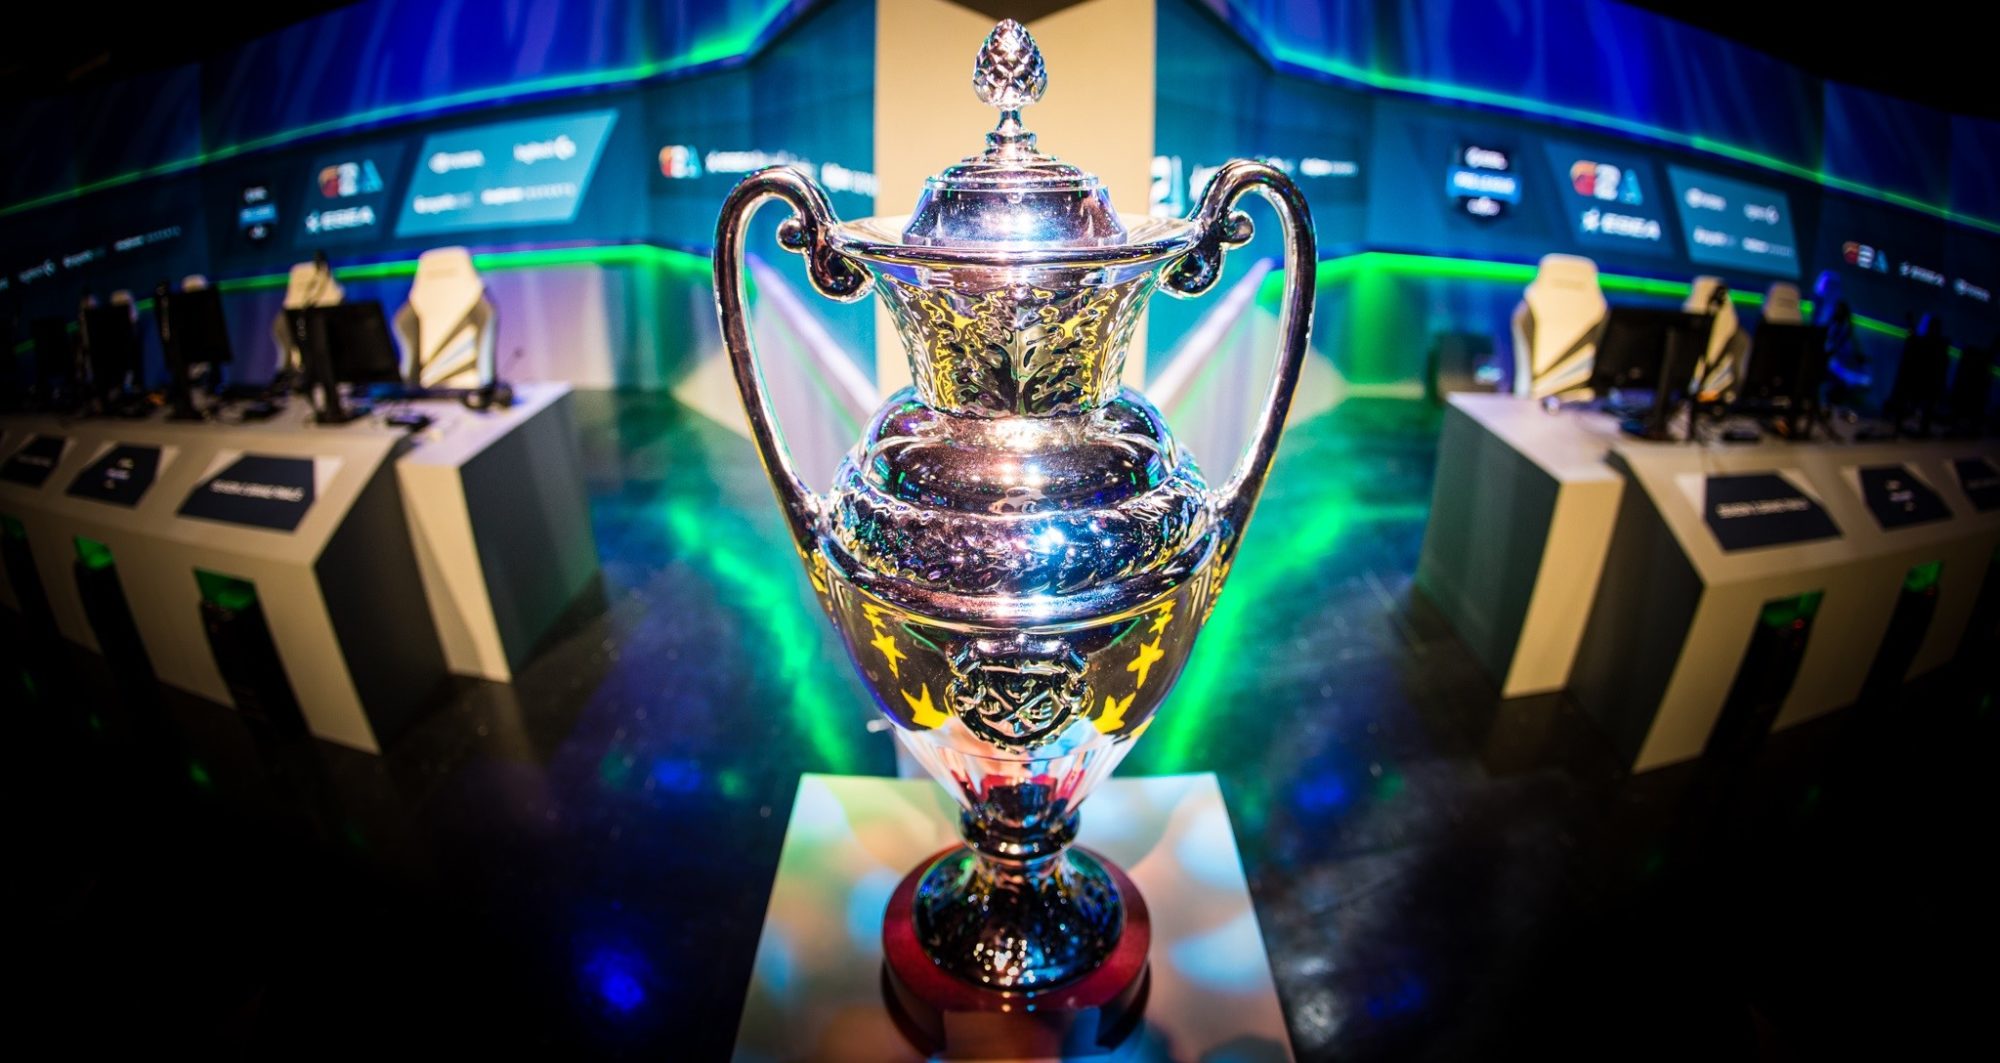 Counter-Strike Teams Compete for $1 Million in ESL Pro League Finals